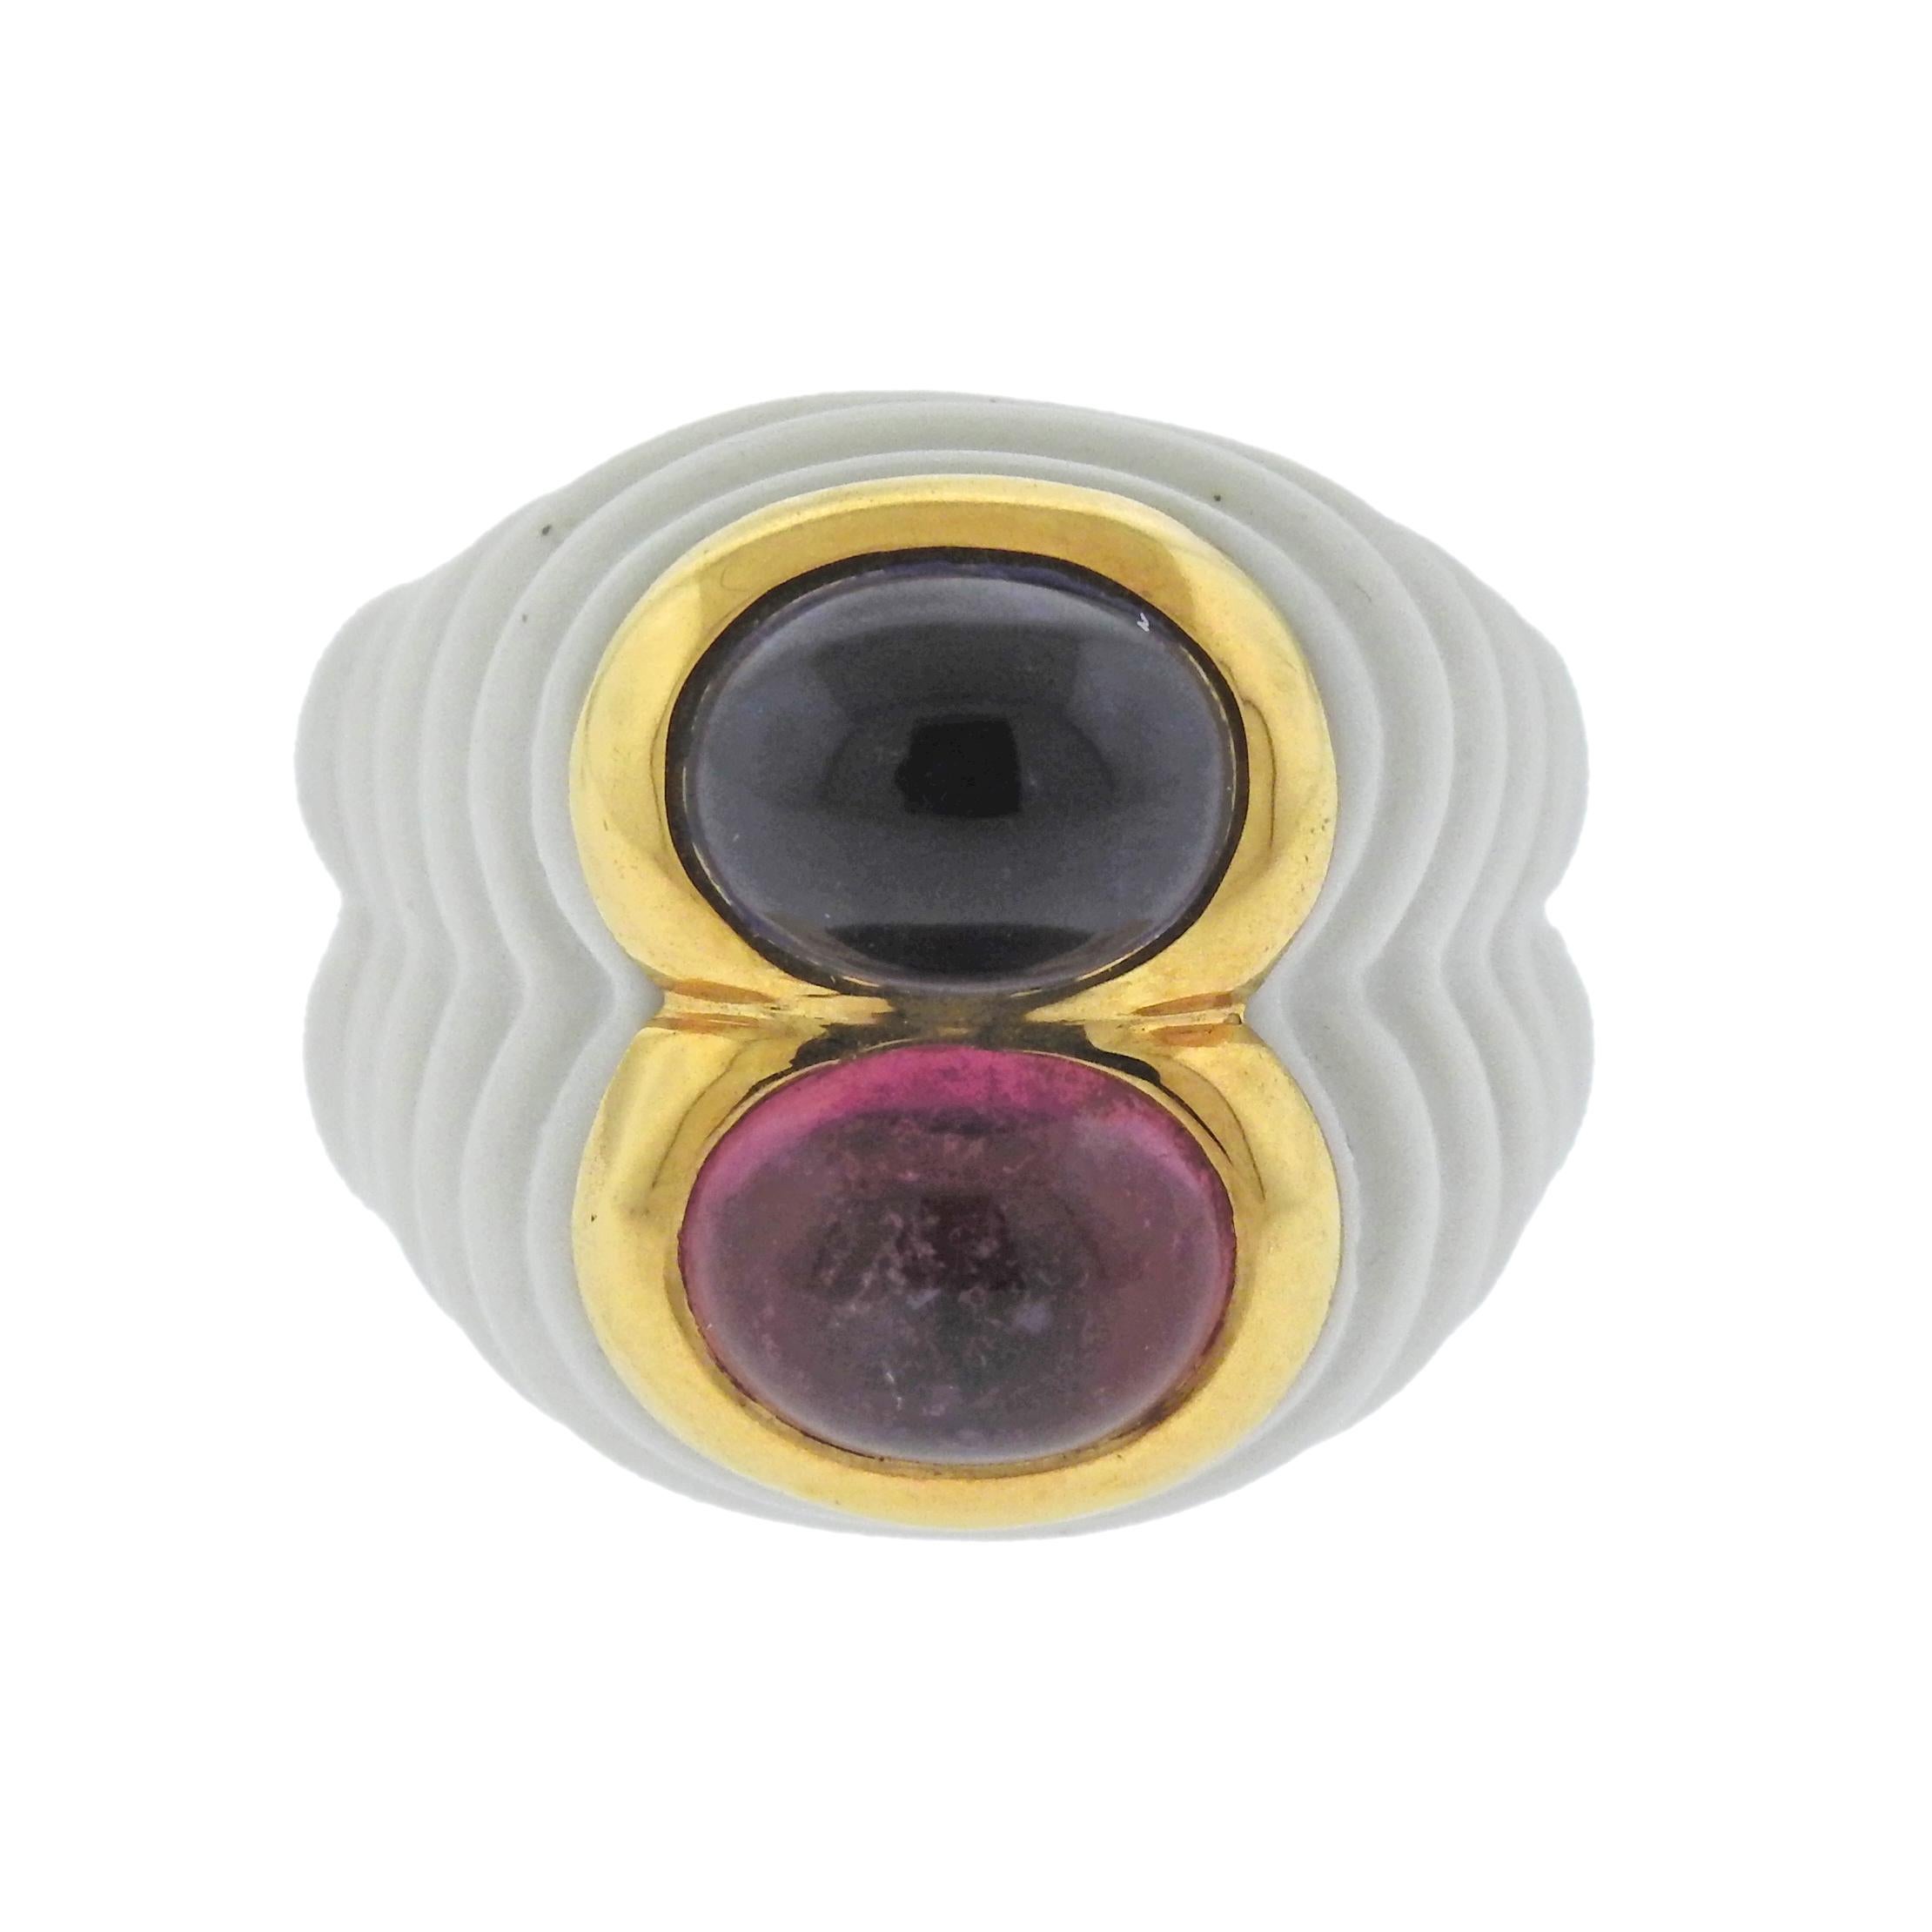 18k gold and white ceramic Bulgari ring, set with iolite and pink tourmaline cabochons. Ring size - 5 3/4, ring top is 18mm wide, weighs 10.8 grams. Marked: Bvlgari, 750, Italian mark.